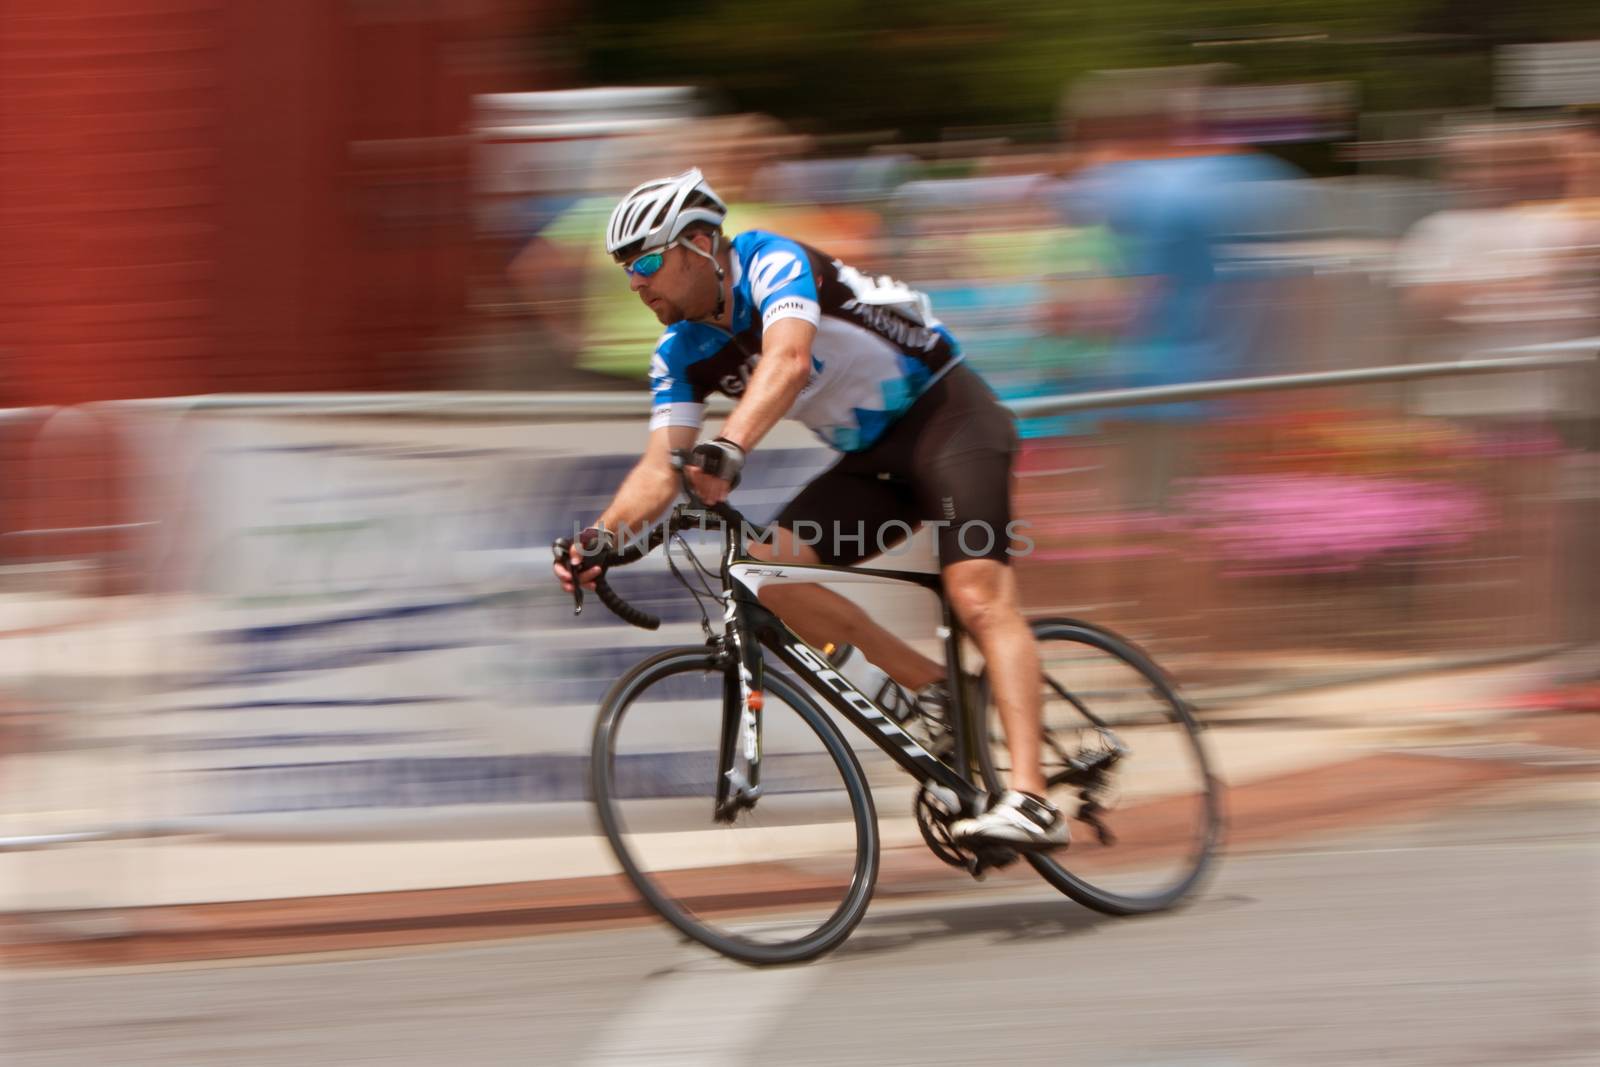 Motion Blur Of Cyclist Competing In Georgia Cup Criterium by BluIz60